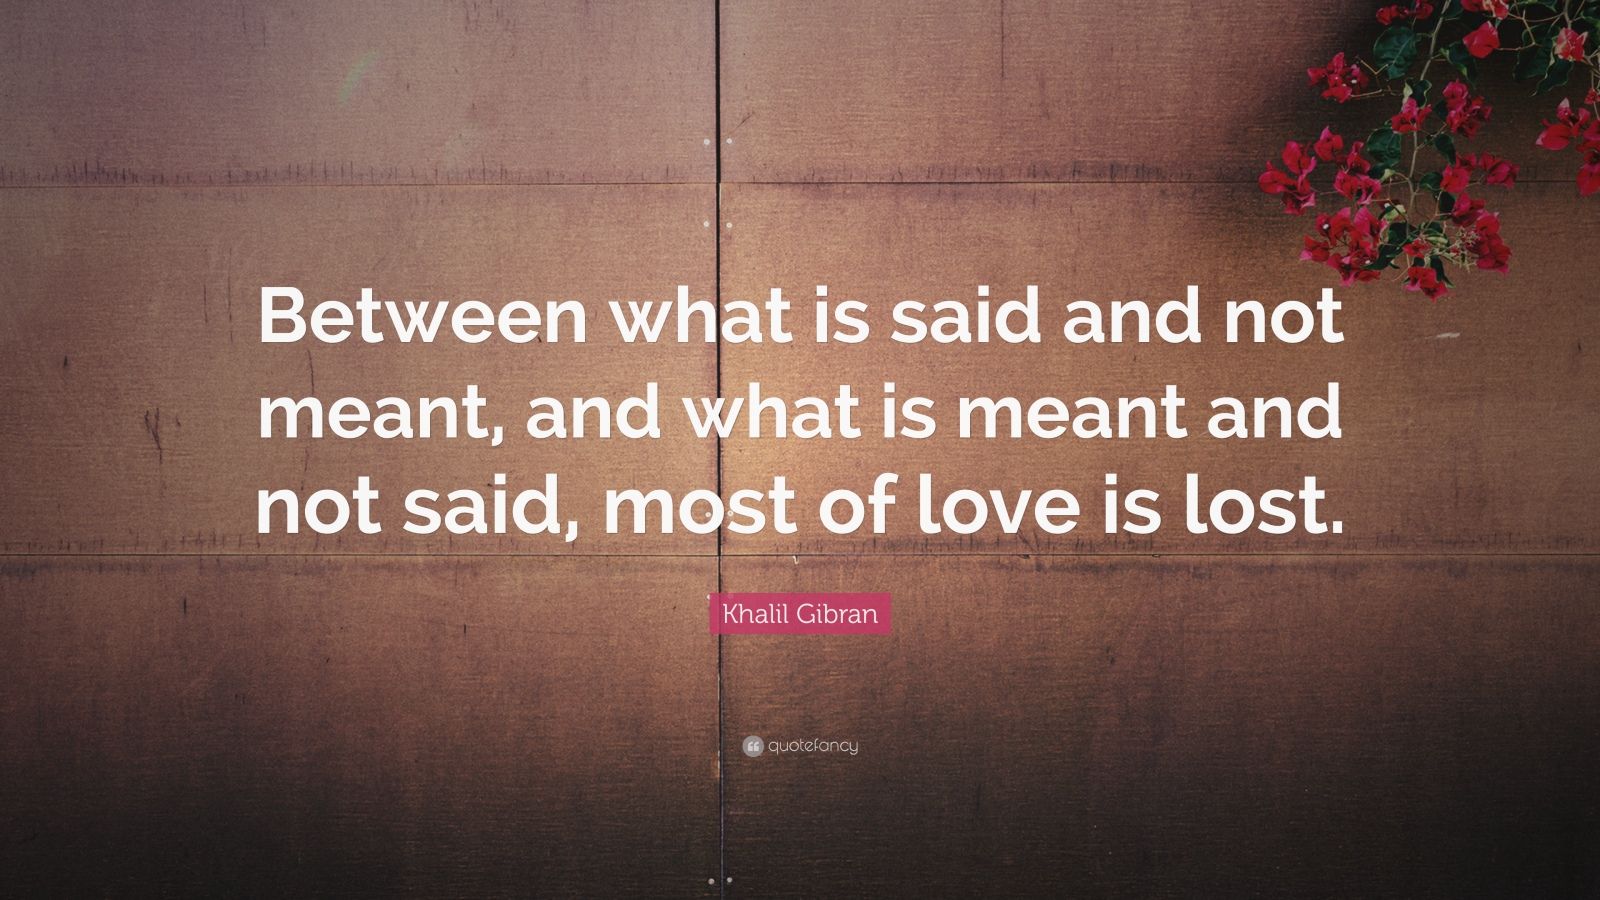 Khalil Gibran Quote: “Between what is said and not meant, and what is ...